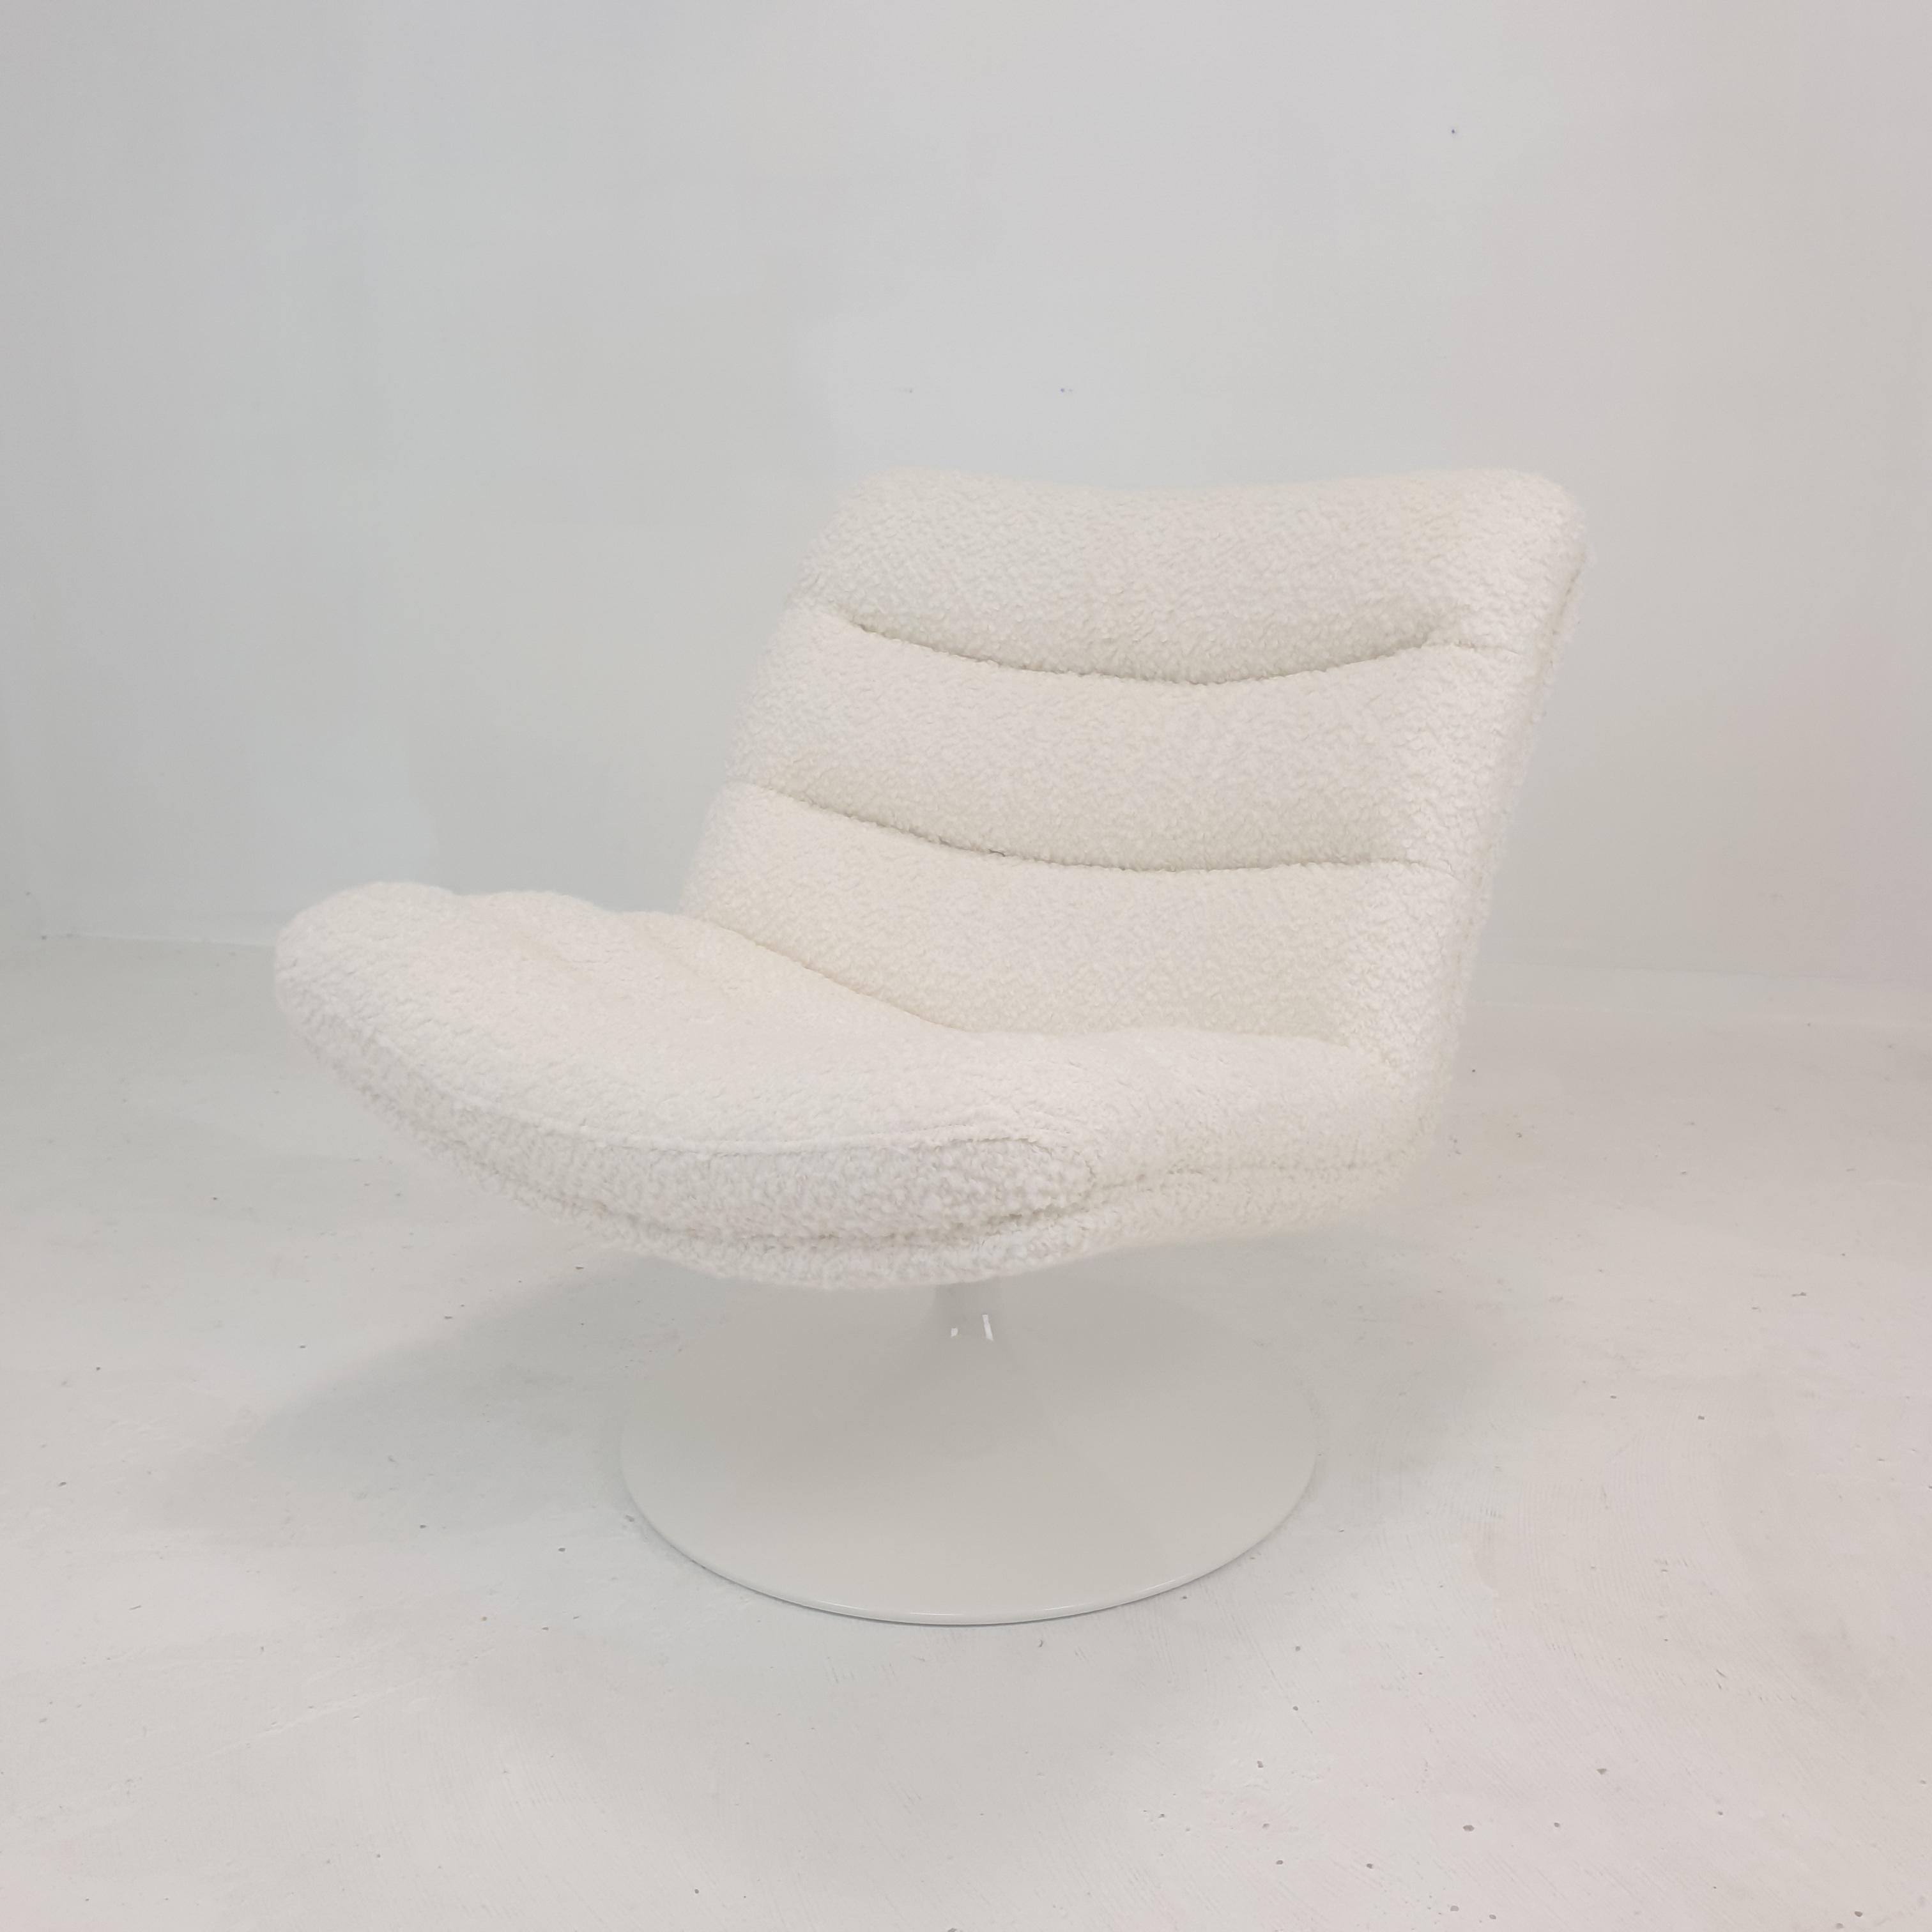 This very comfortable pivoting model 975 lounge chair is designed by Geoffrey Harcourt for Artifort in the 60's., 

It is just restored with new stunning Alpaca wool bouclé fabric. 

The foot is painted by a professional.

This lovely chair is